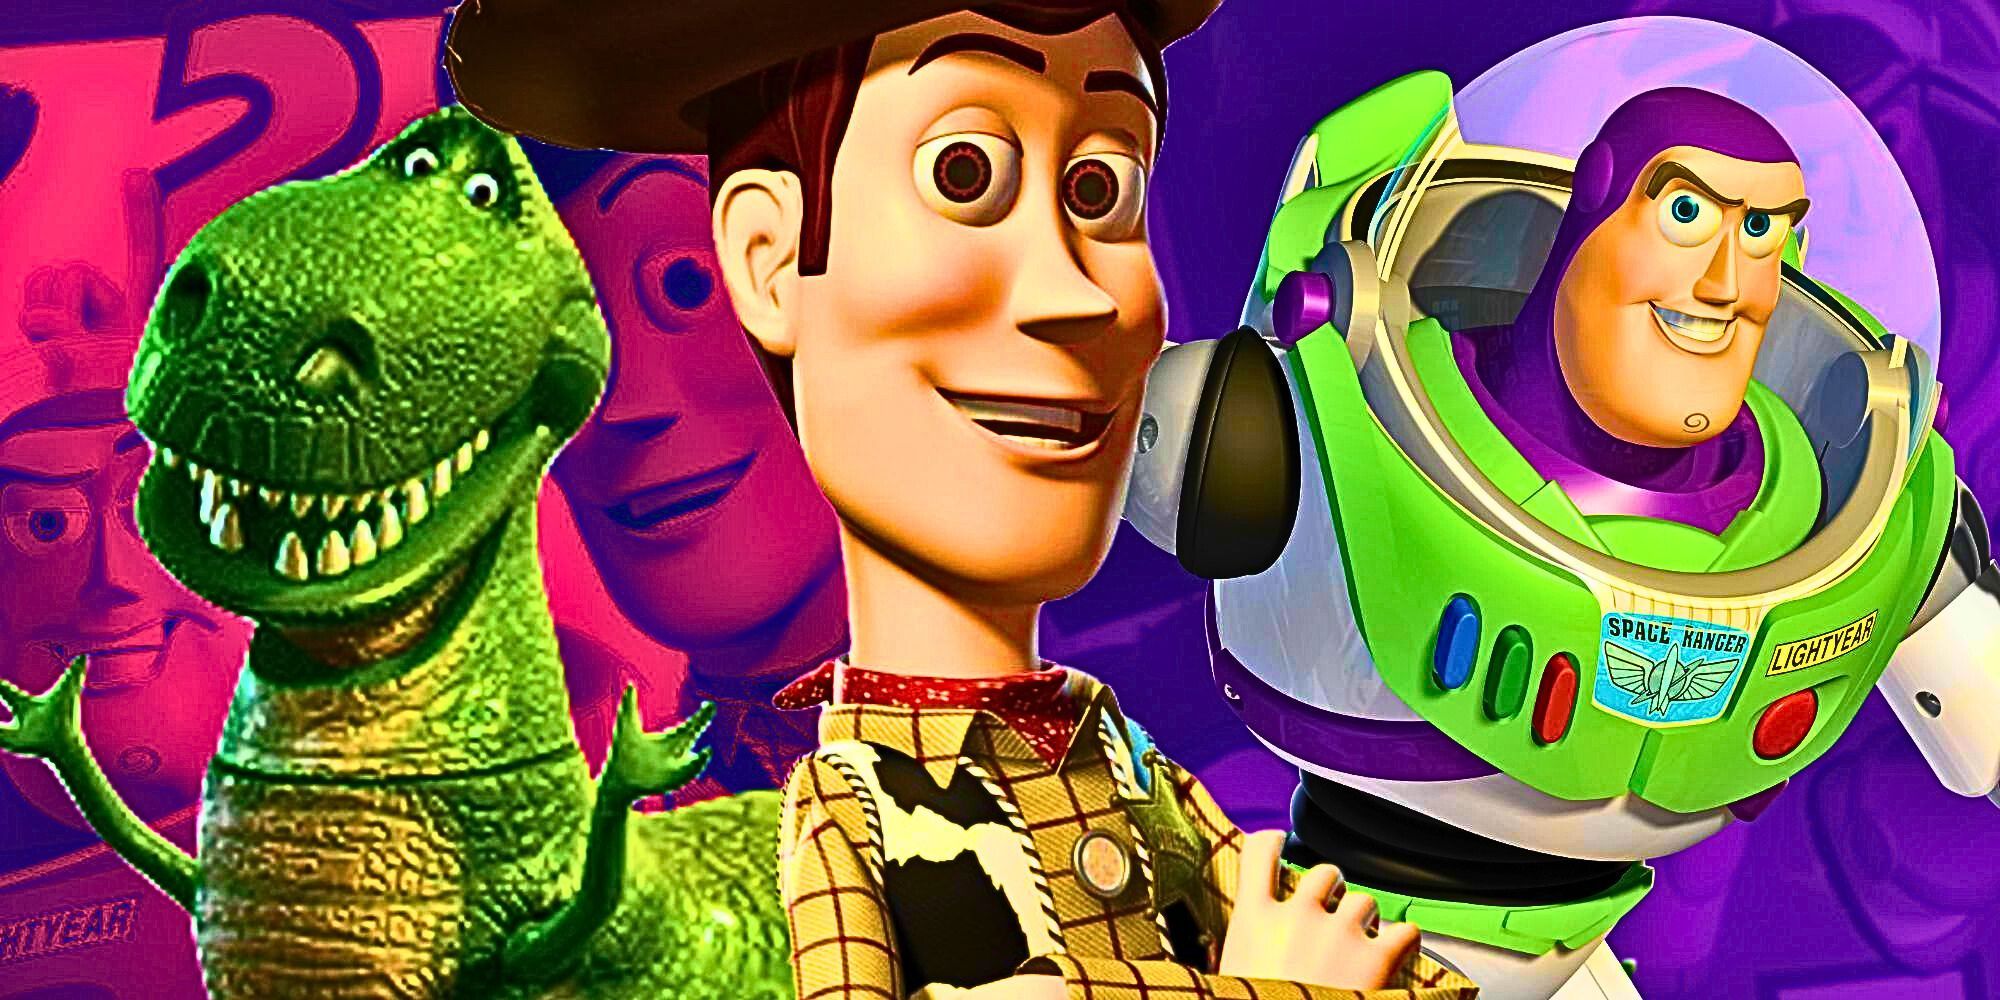 A custom image of Rex, Woody, and Buzz Lighter from Toy Story